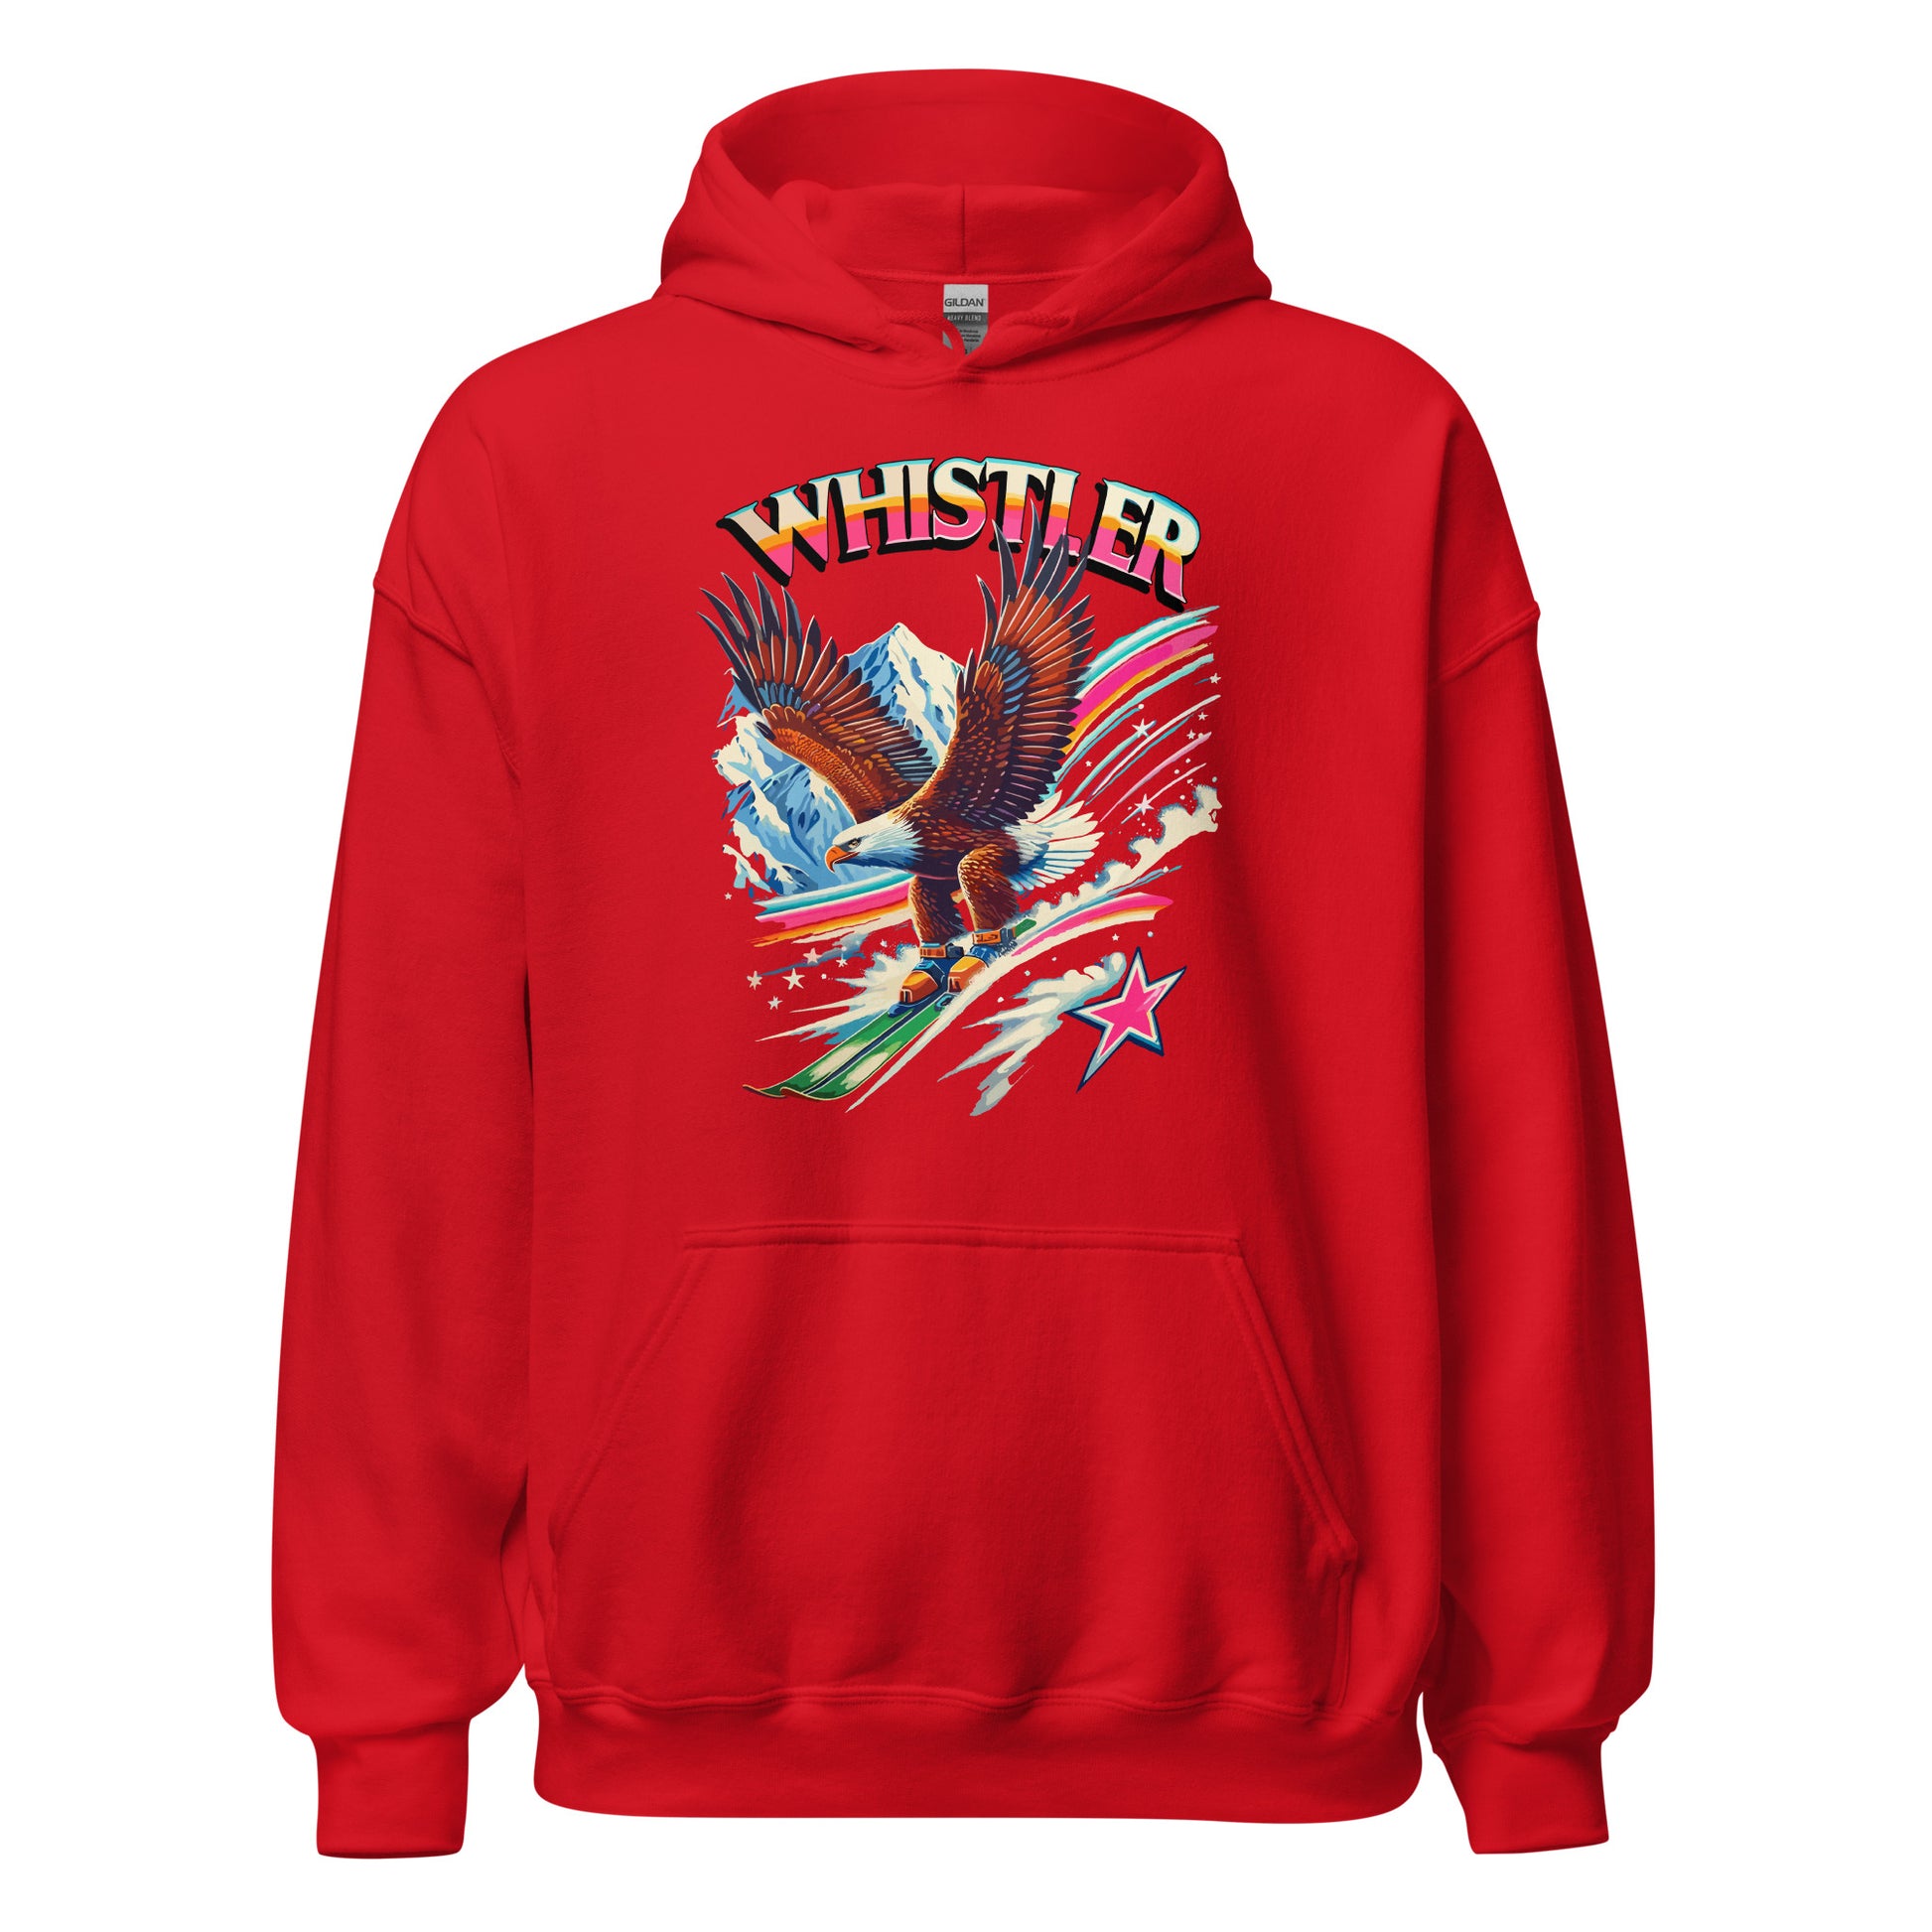 Whistler eagle skiing hoodie printed by Whistler Shirts